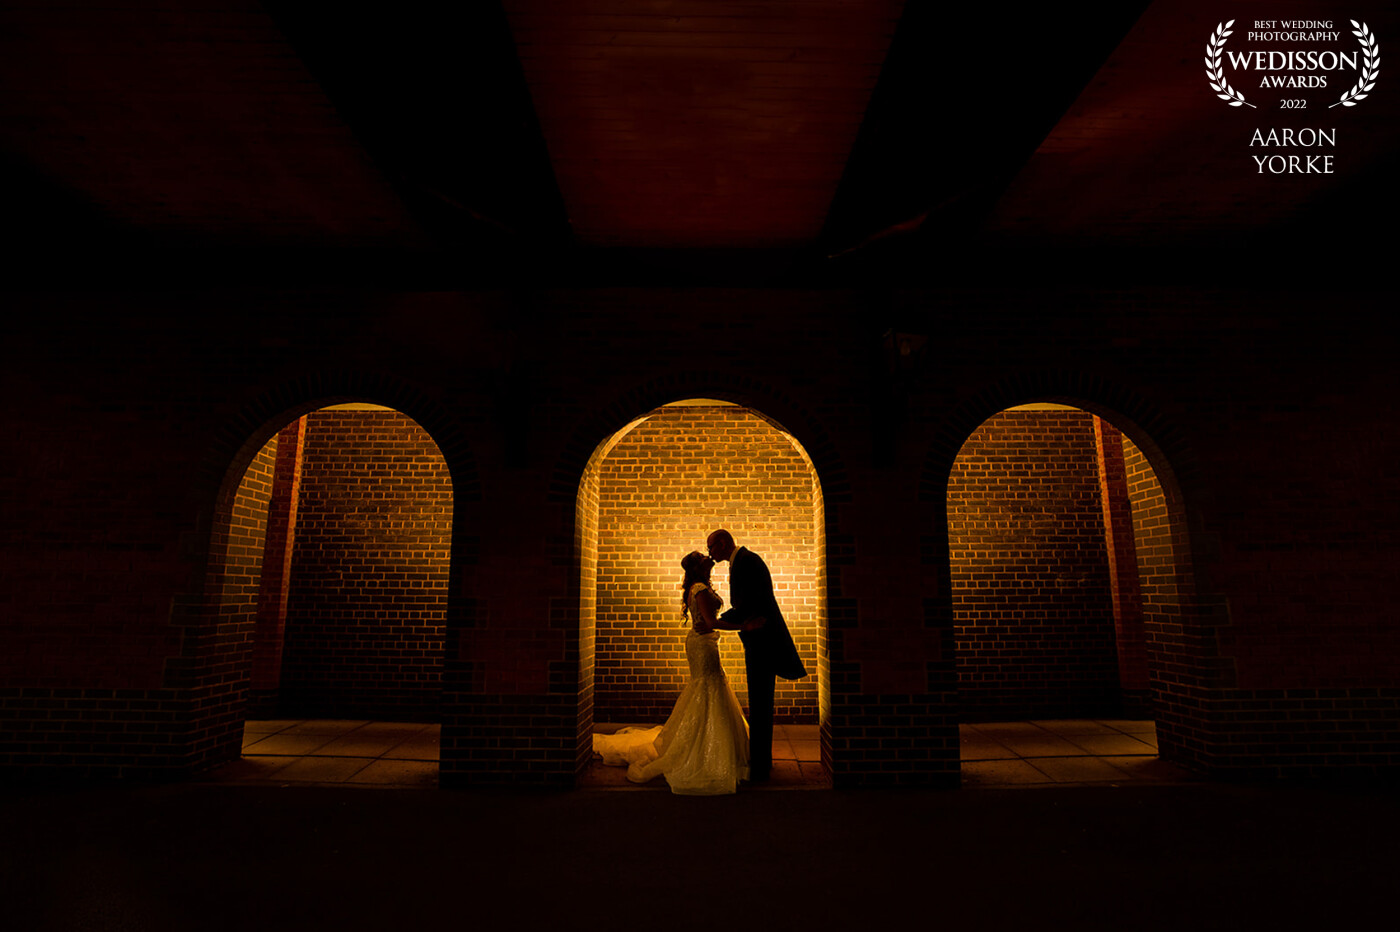 I took this image at the Forest of Arden in Meriden, West Midlands. This is near the entrance and I wanted to created a nice soft orange silhouette effect. I placed a bare flash on the floor with an orange gel bouncing off the back wall. A simple and effective shot I love to take!